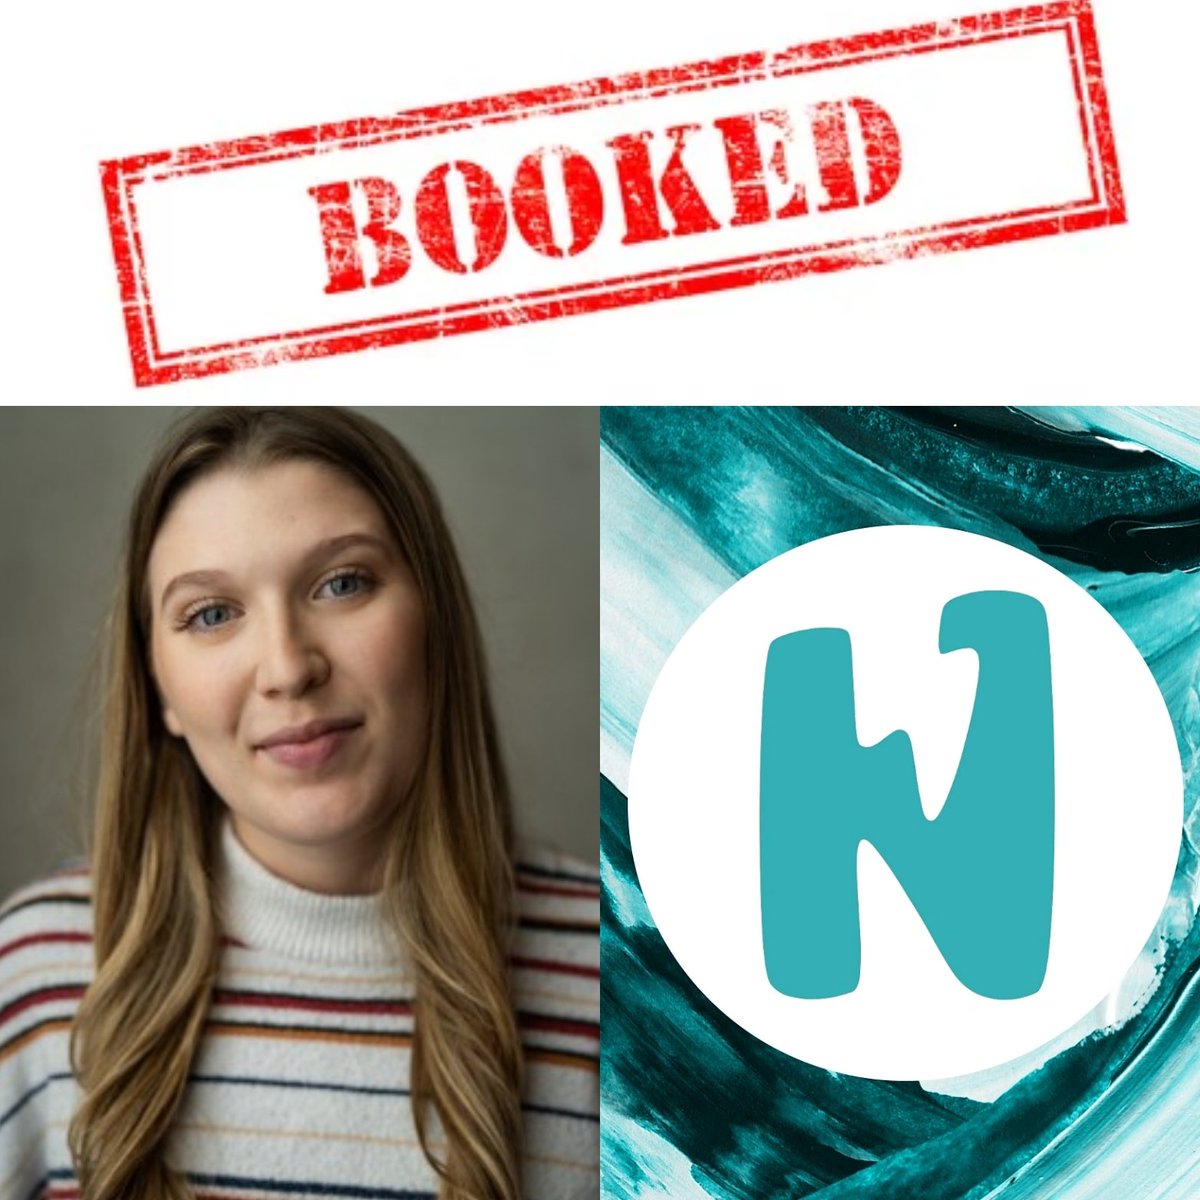 Thrilled for @RheannaTrueman #BOOKED via direct offer for a brilliant open-air theatre tour. #HardWorkPaysOff #happyagent